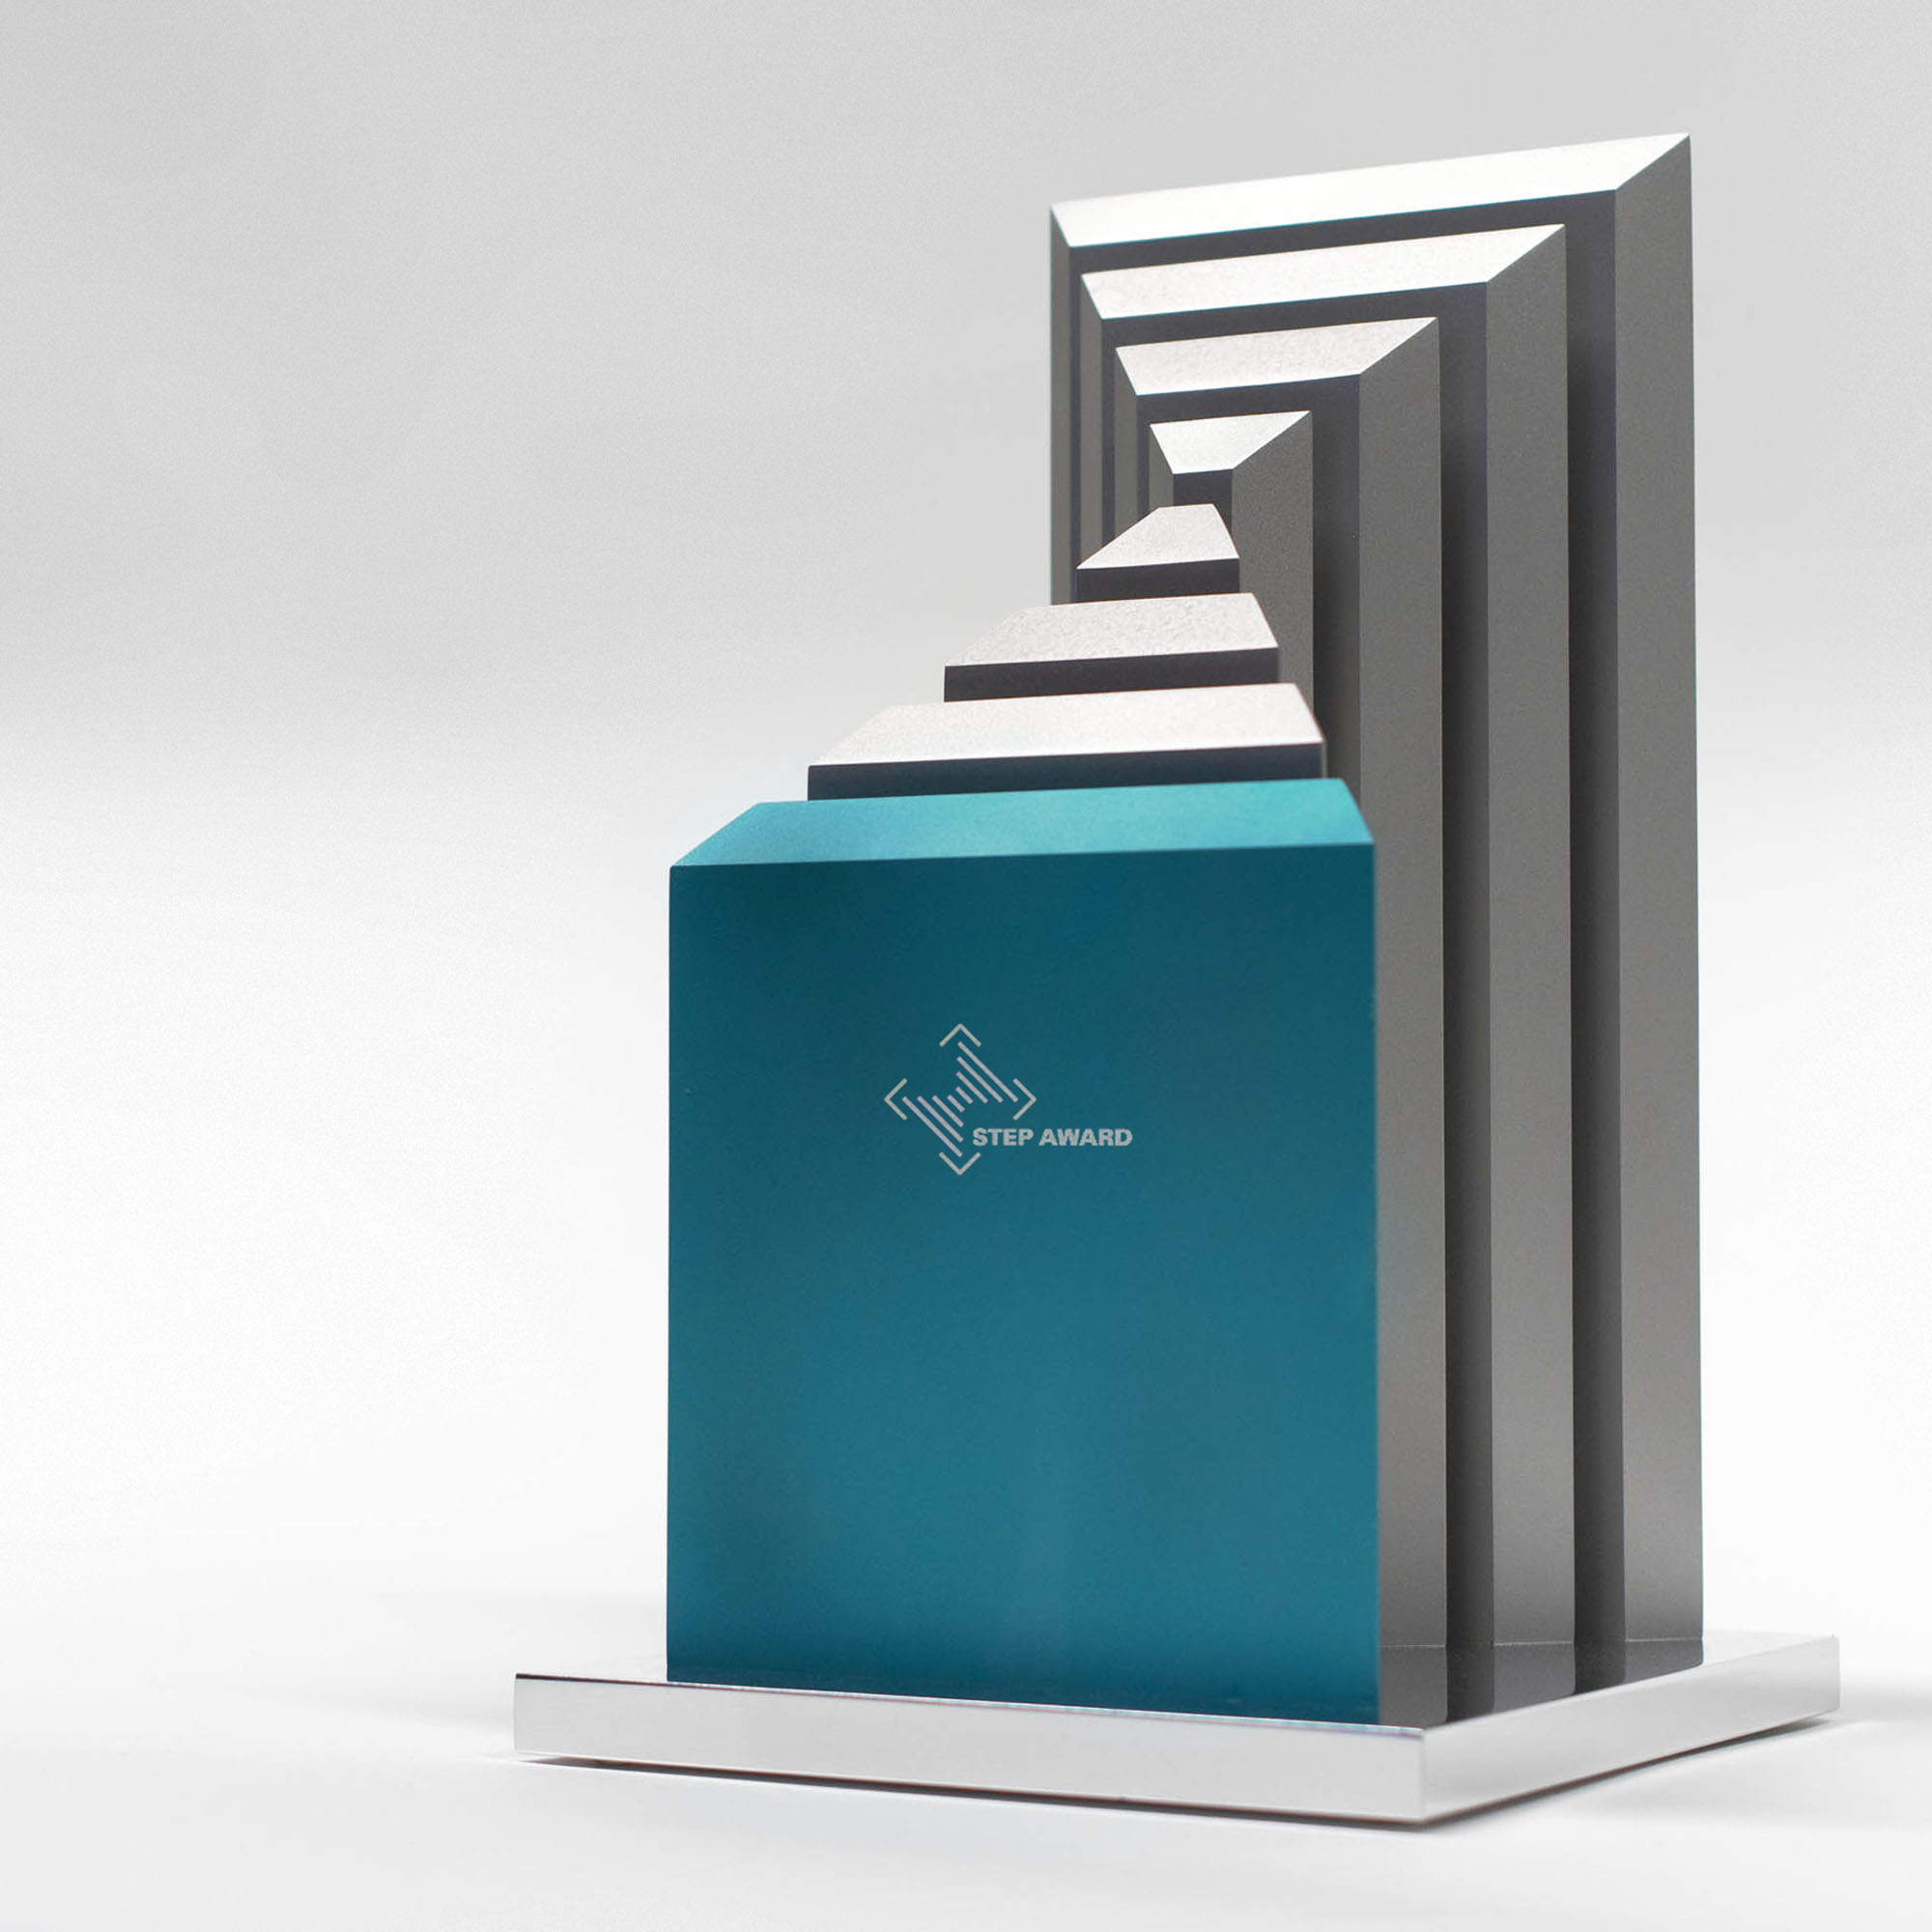 Design and implementation of the Step Award trophy of the FAZ Institute